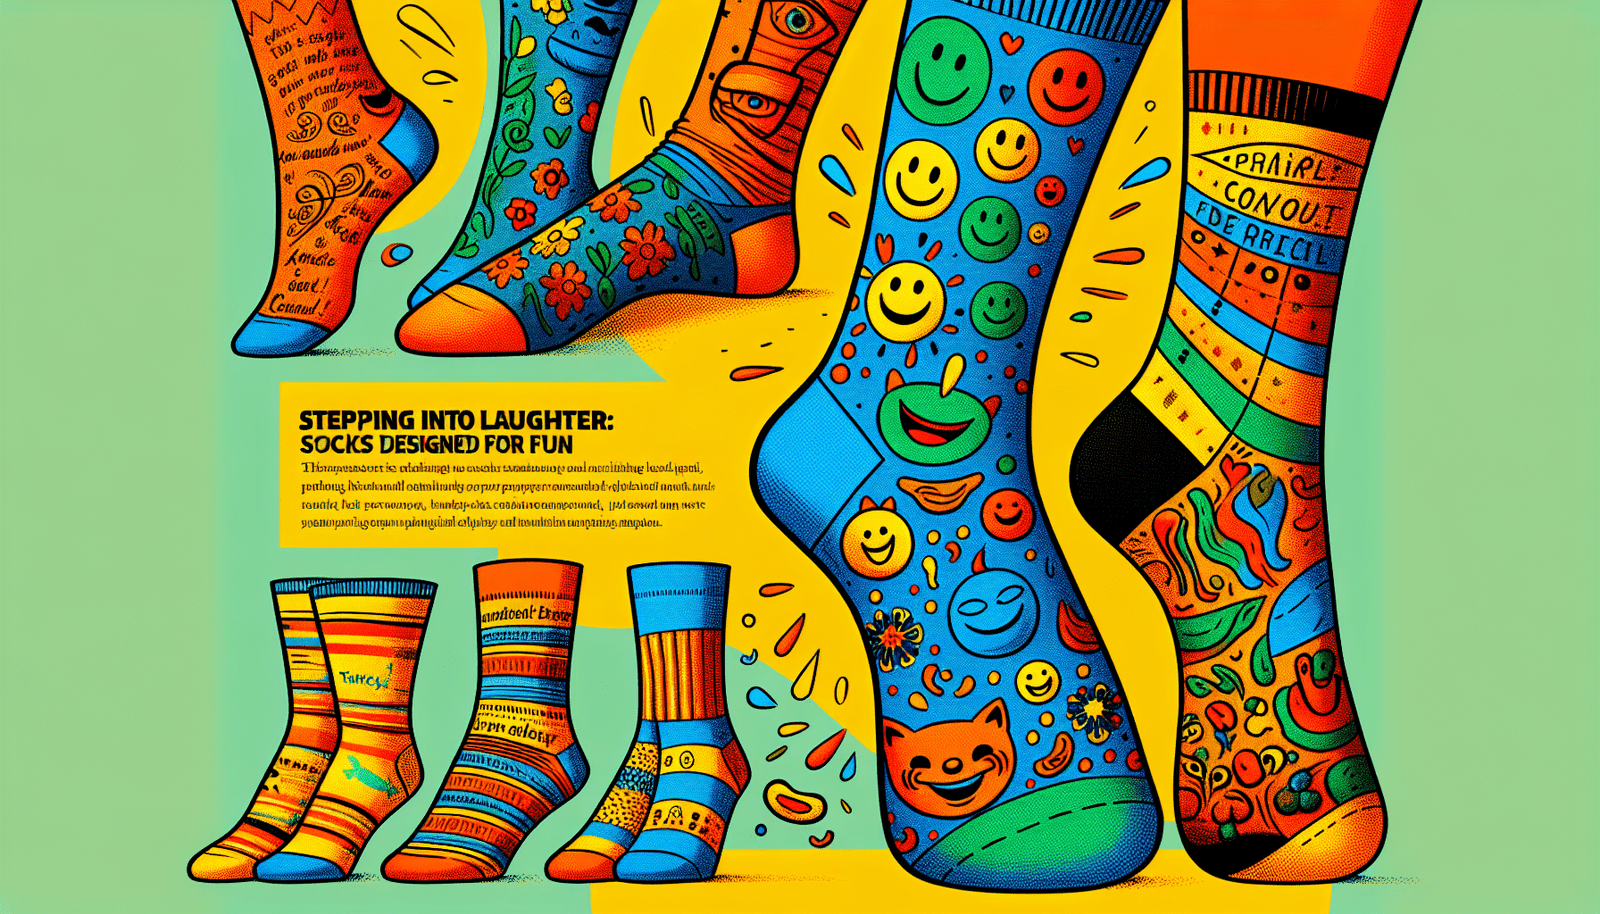 Stepping into Laughter: Socks with Humorous Themes and Patterns